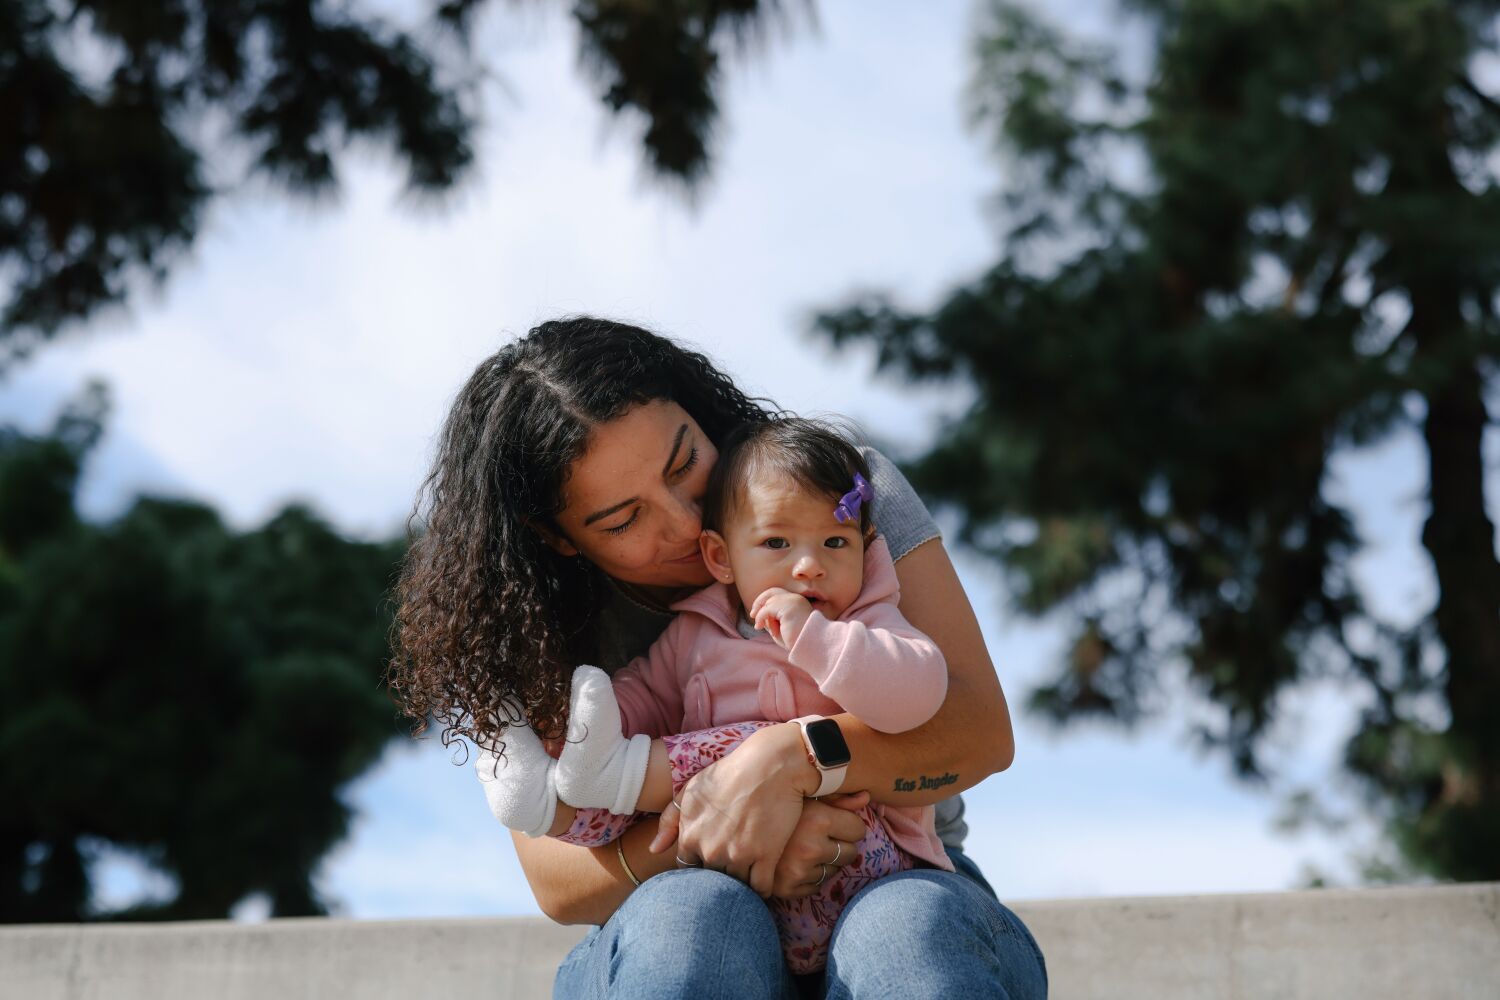 California's child care crisis: How three families are fighting to stay afloat